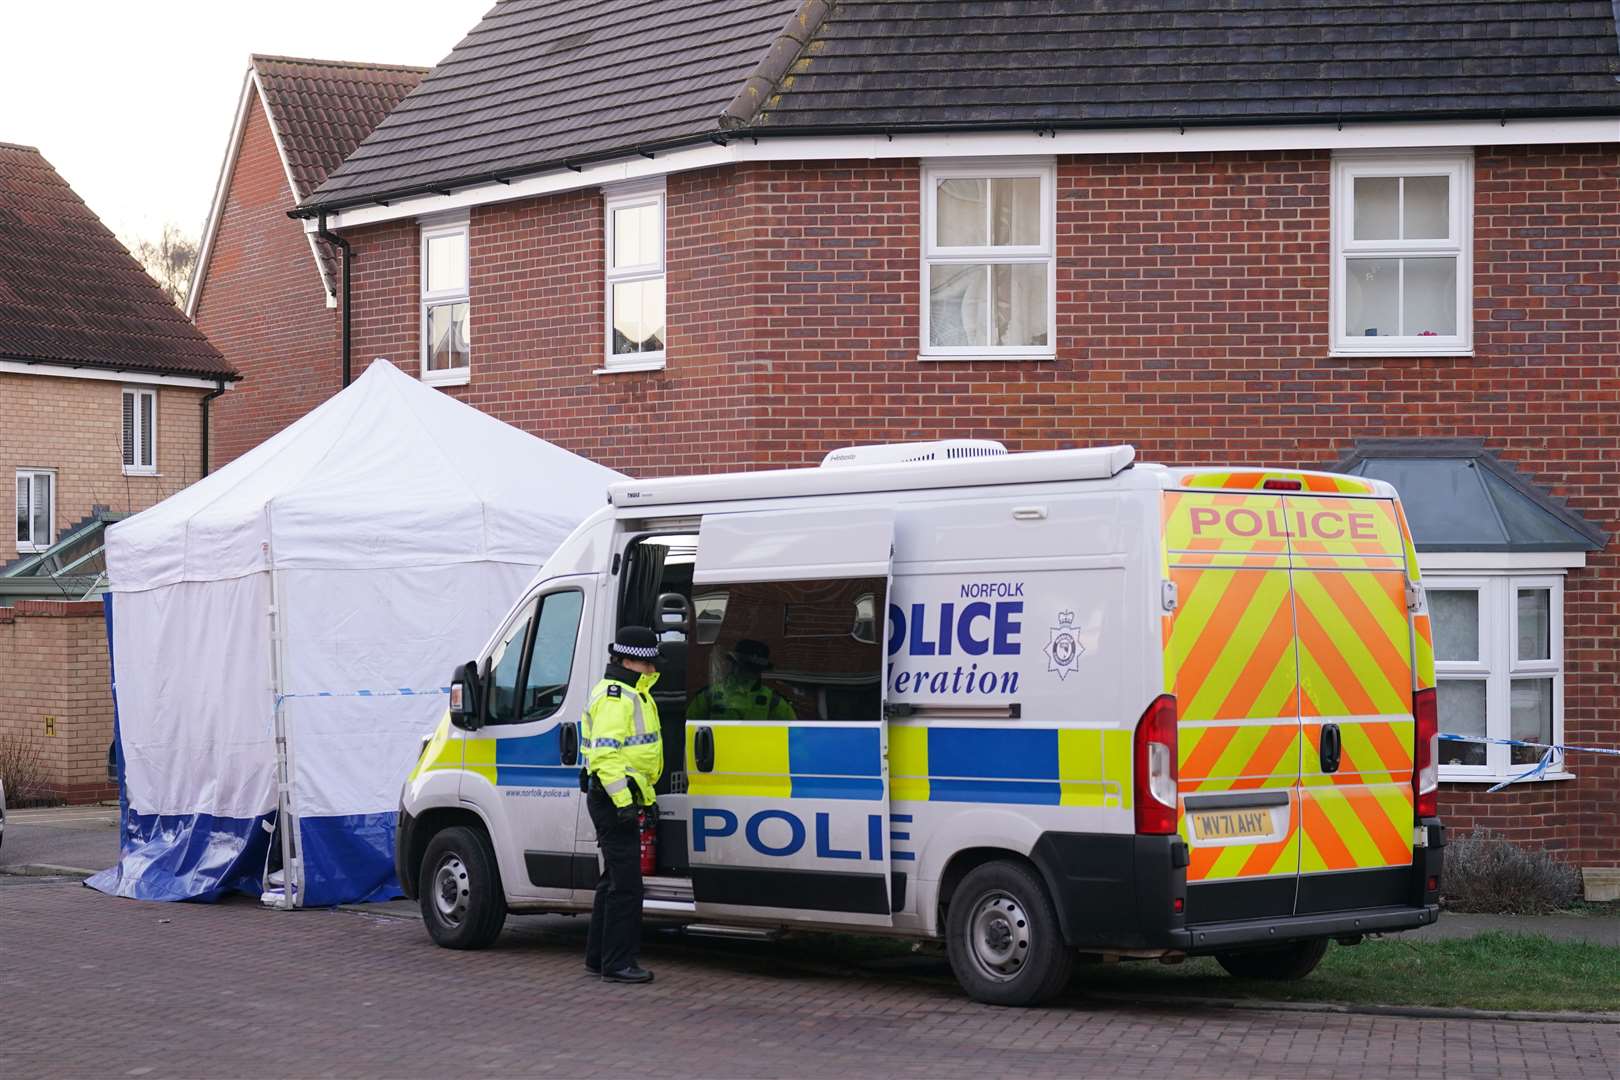 Police outside a house in Costessey near Norwich after four people were found dead inside the property(Joe Giddens/PA)